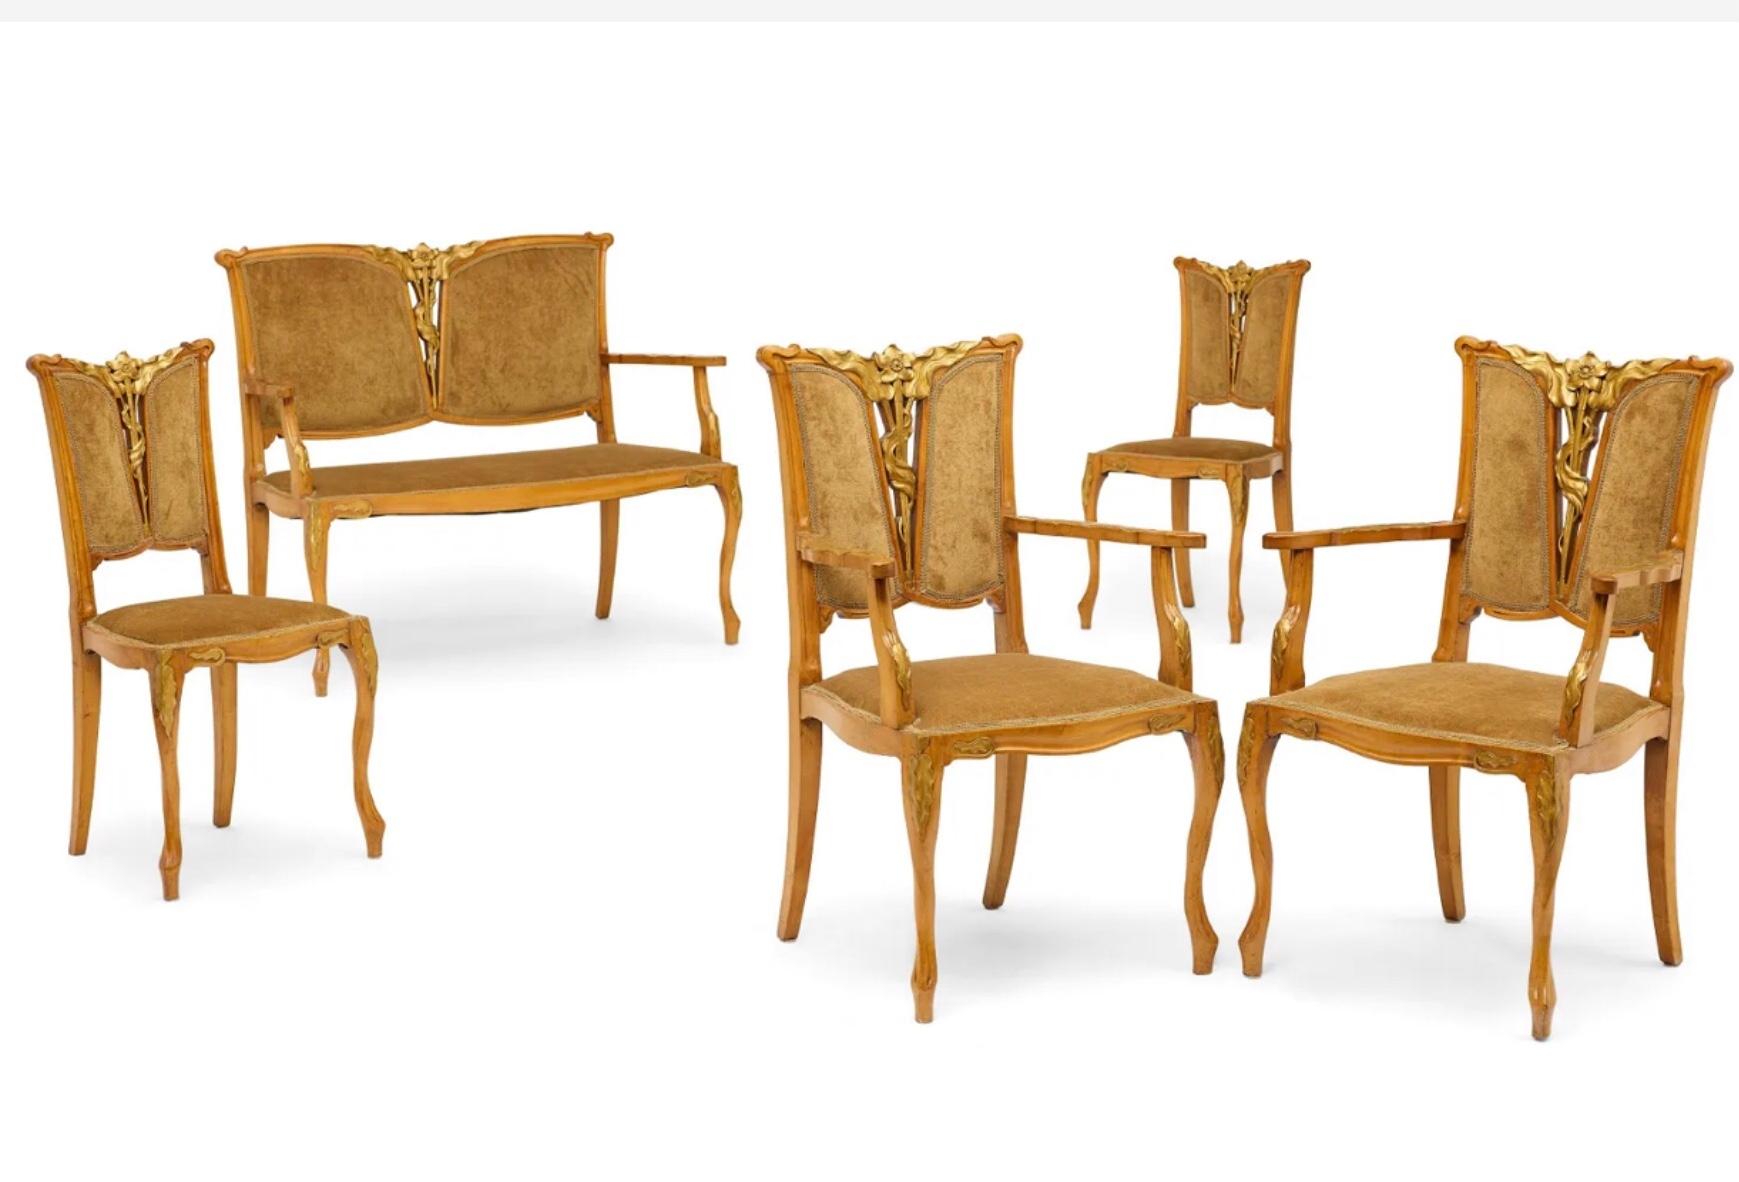 GEORGES DE FEURE (1868-1943), 
Five Piece Salon Suite
circa 1900

Walnut and parcel-gilt, comprising a settee, two armchairs and two side chairs. It is rare to find a full set of period salon Art Nouveau furniture and the style of Georges De